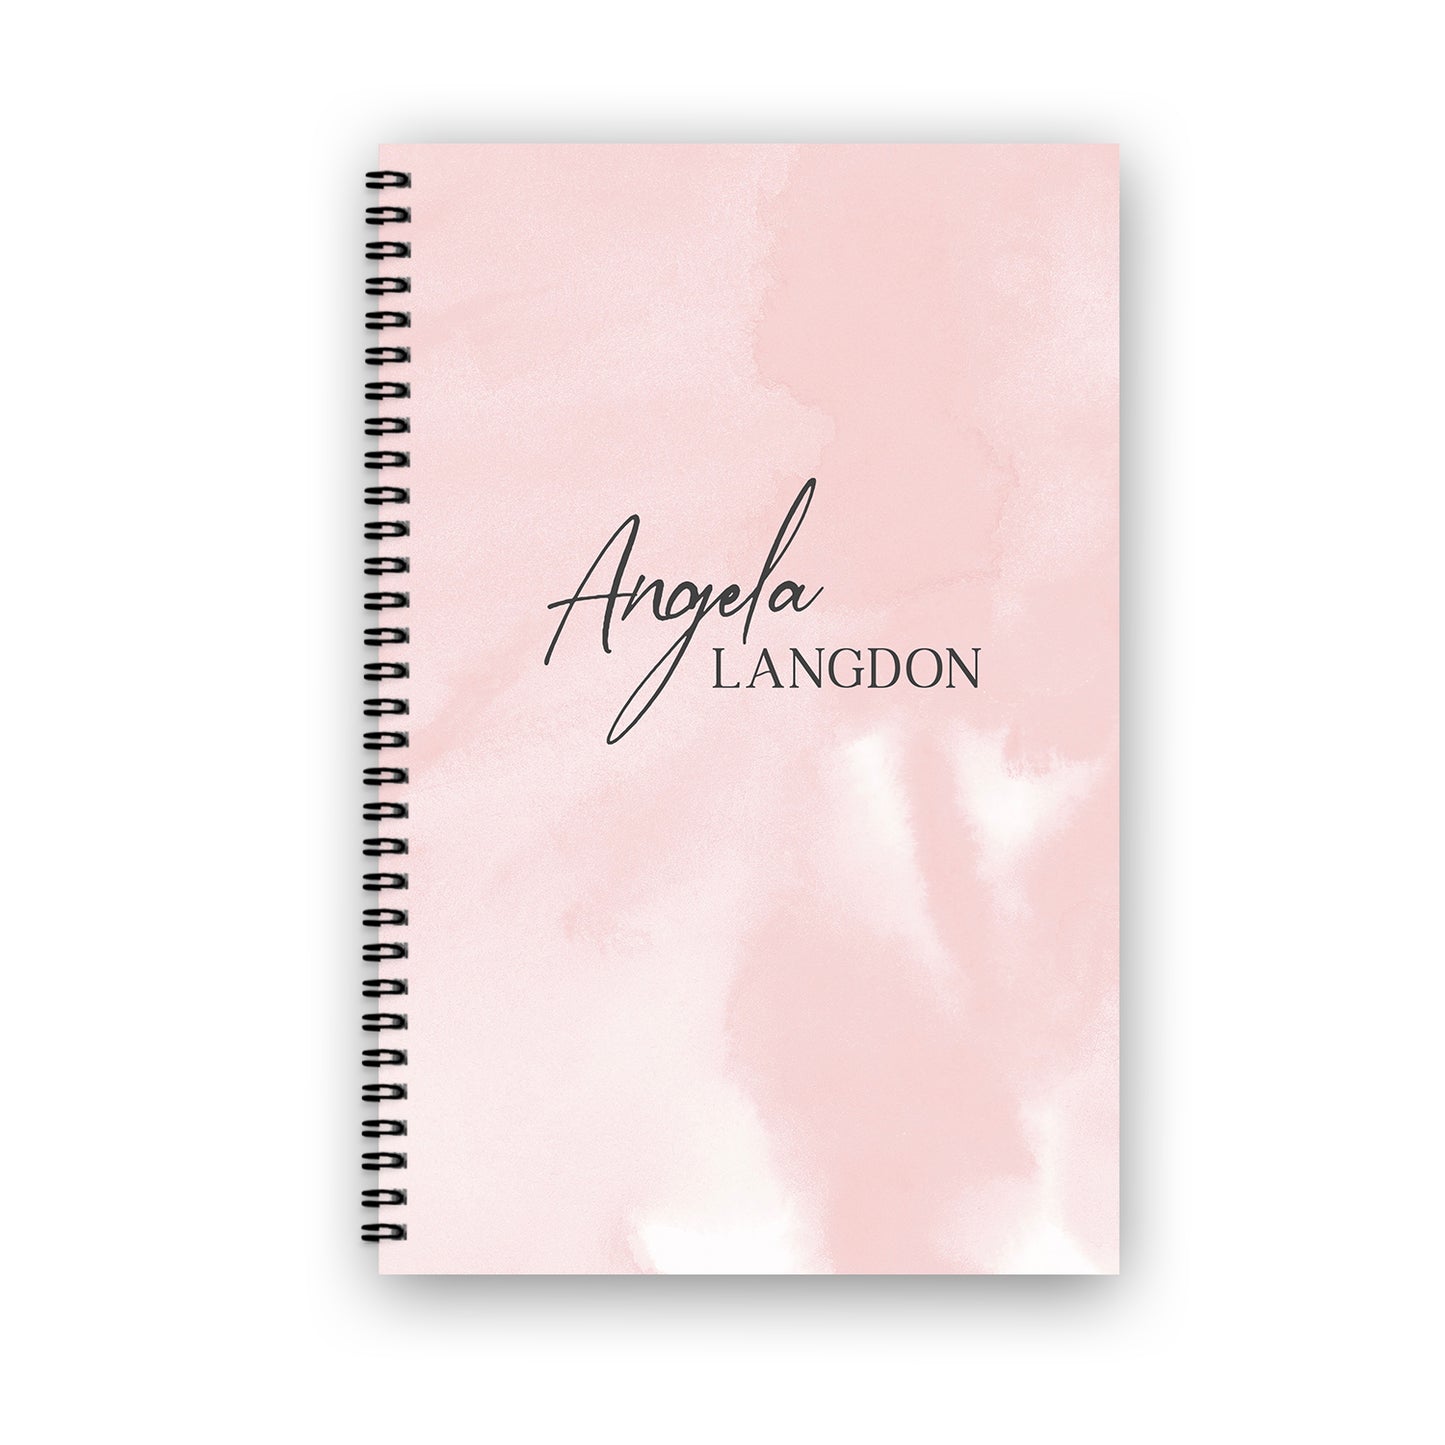 Blush Watercolor Notebook